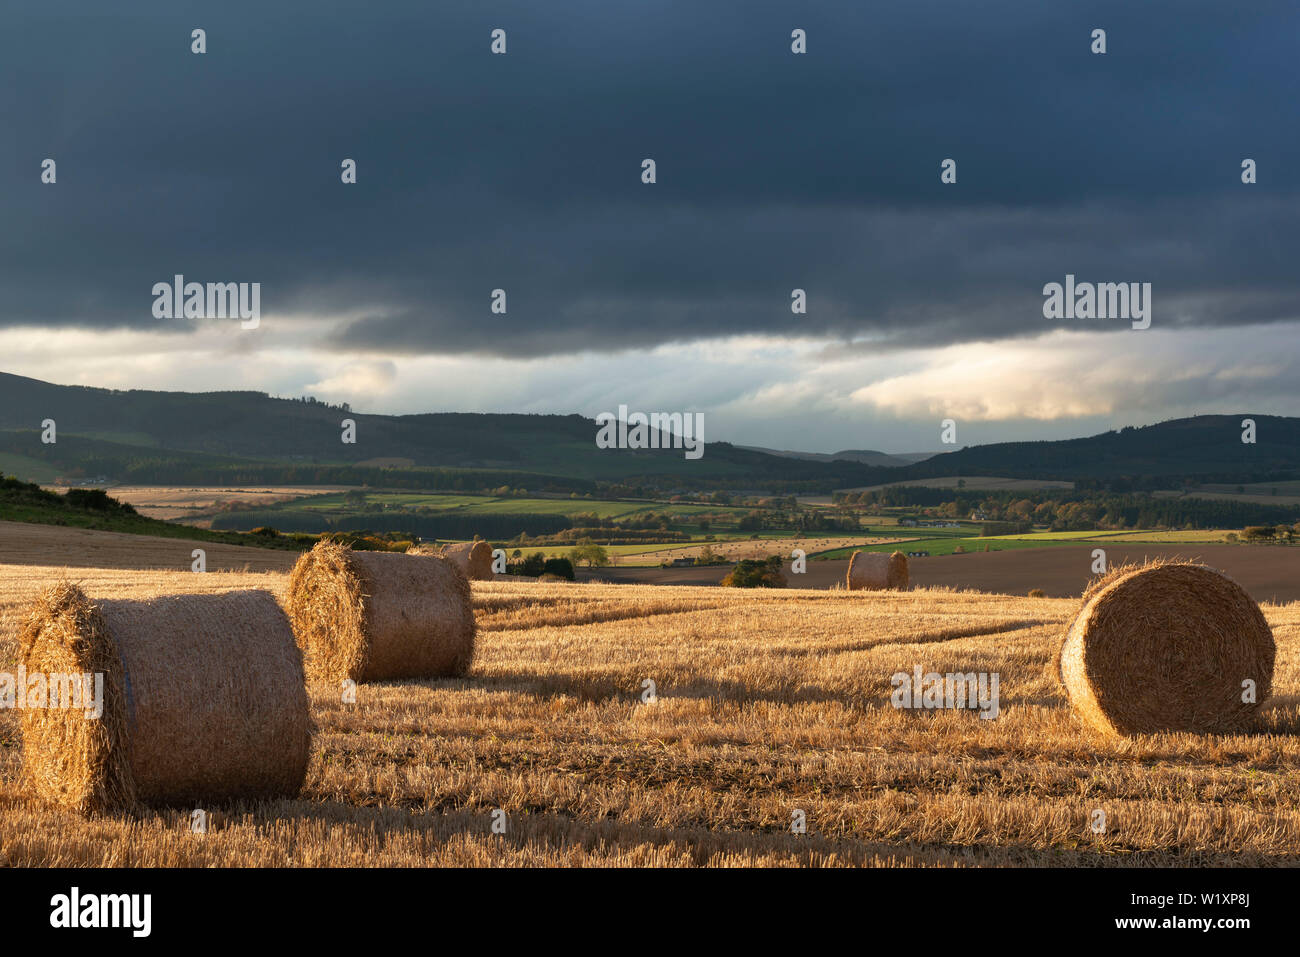 After the Harvest, Bales of Straw Lie in an Aberdeenshire Field Under Dark Clouds in Late Afternoon Stock Photo